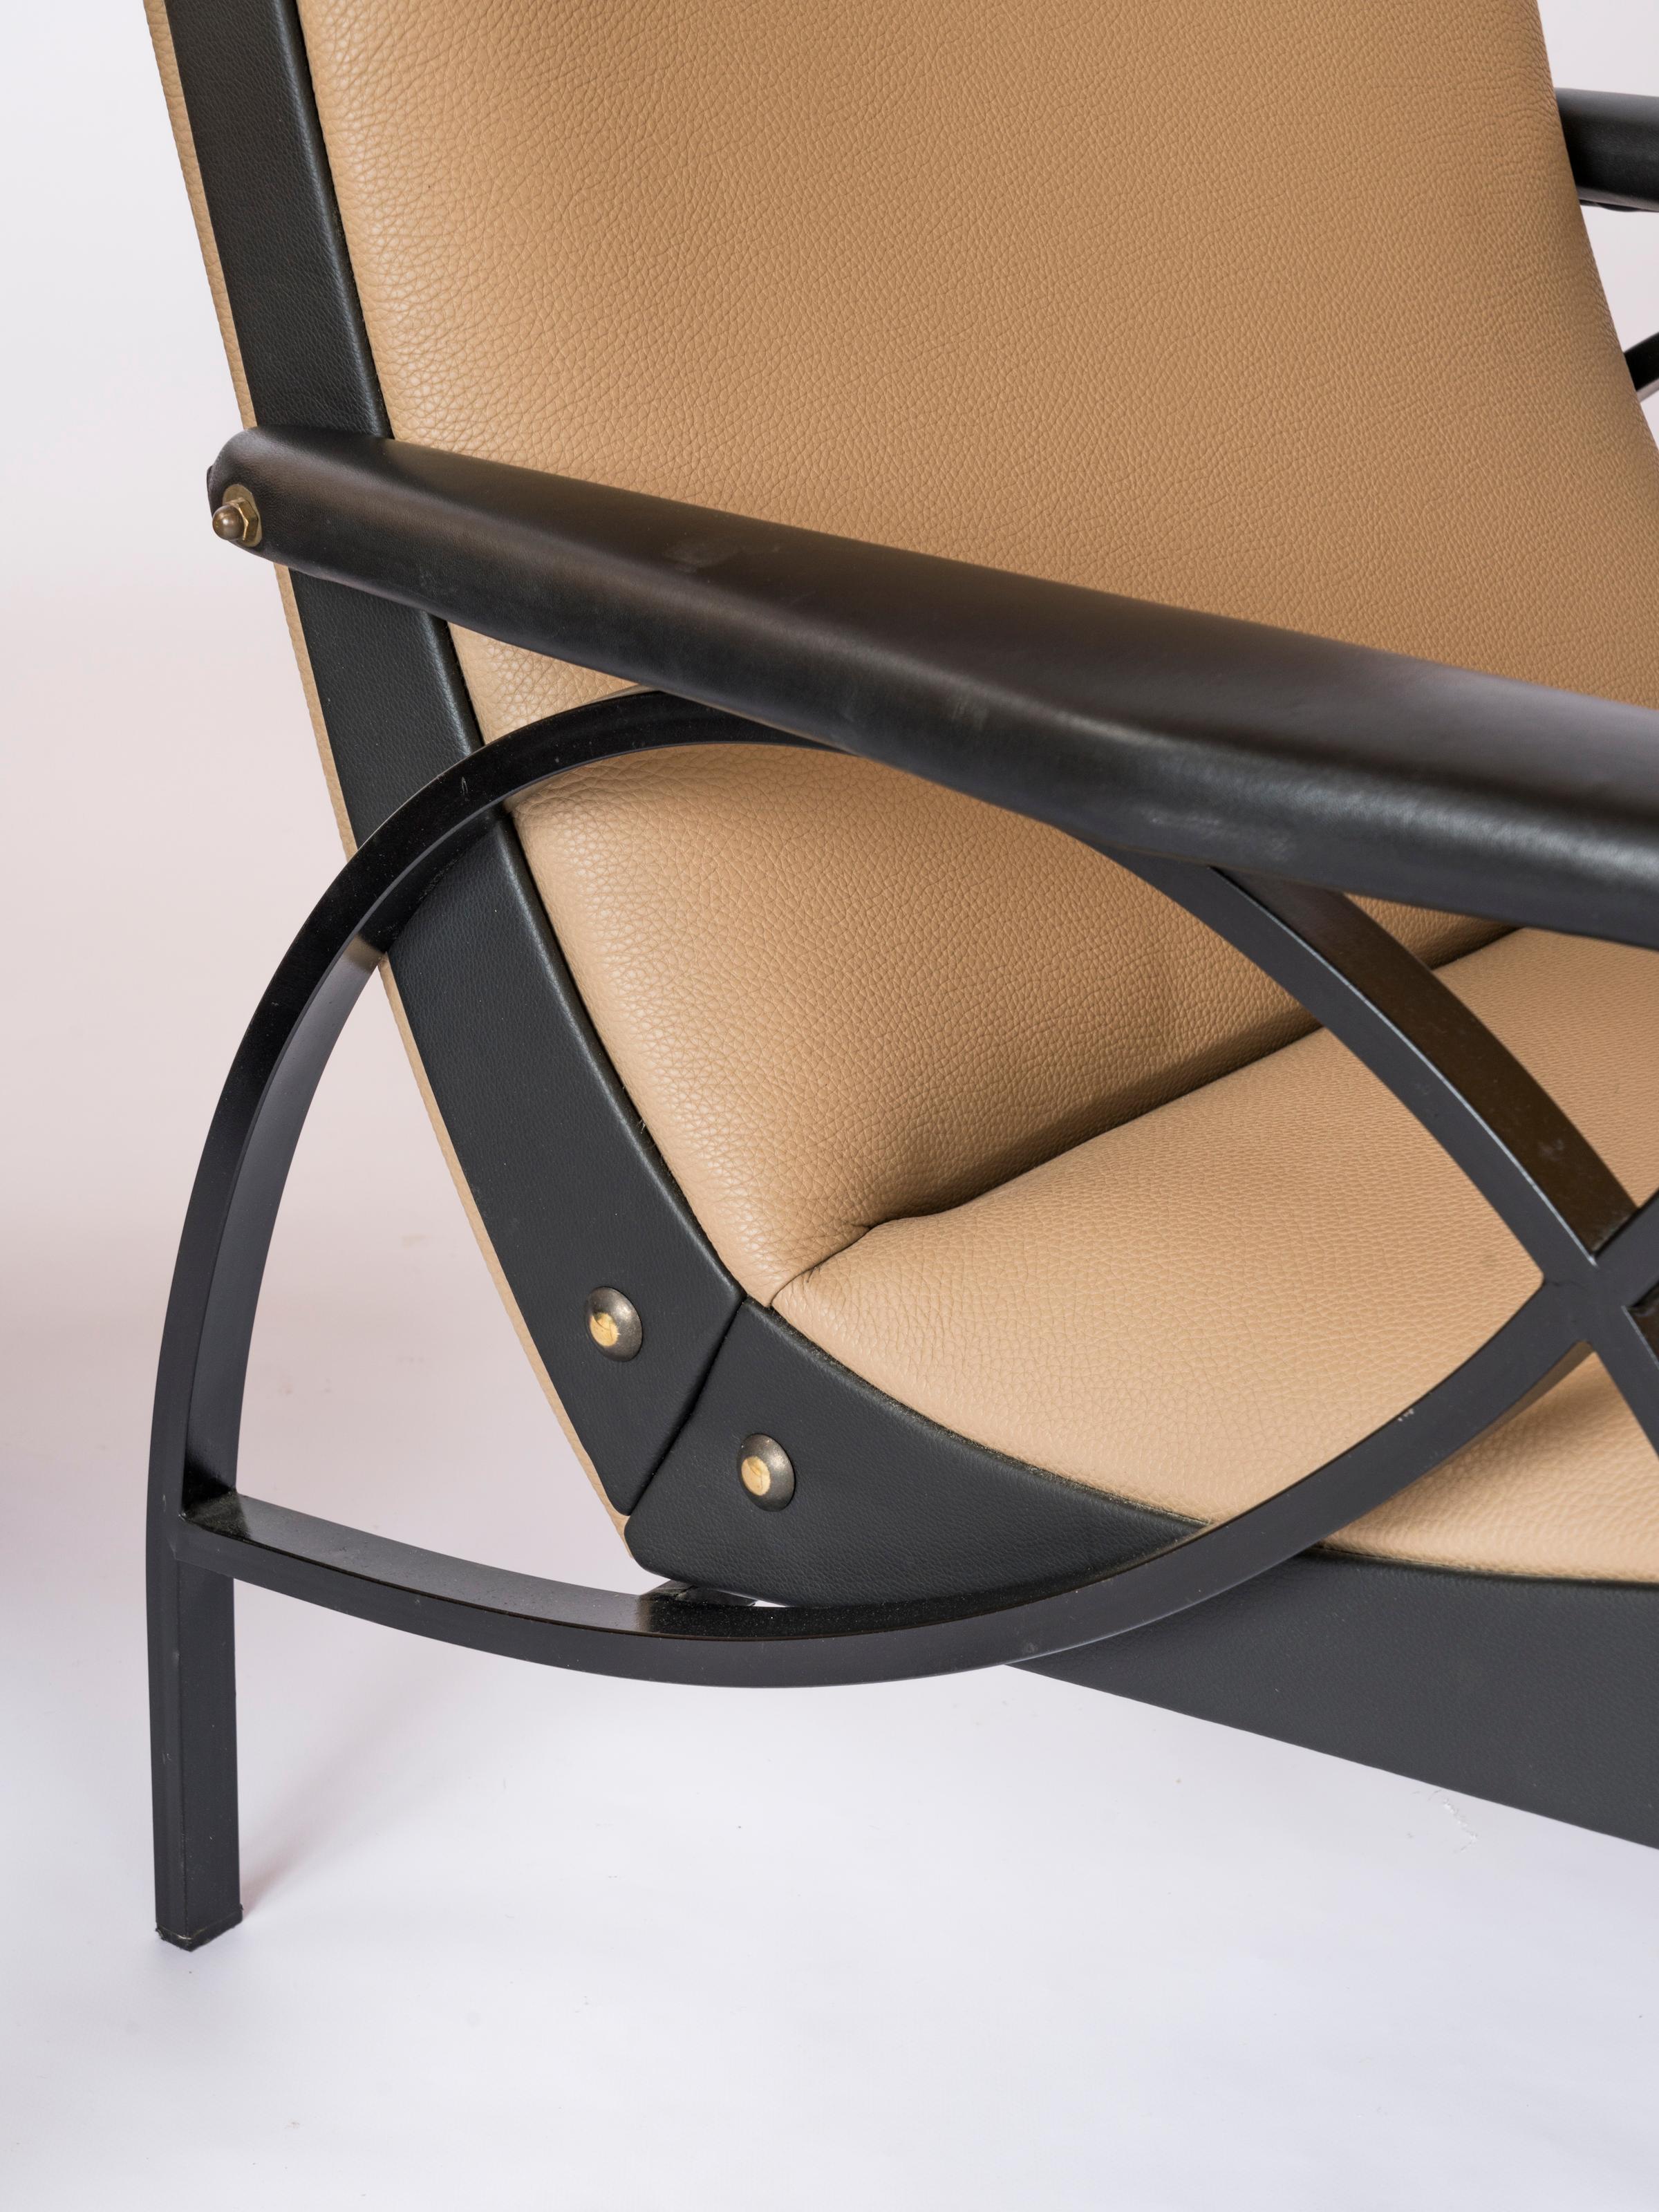 Graphic pair of lacquered steel, leather and moleskine armchairs in the style of Osvaldo Borsani. These modernist Italian chairs feature two tones taupe and black seat and side padding leather finishing. Patinated brass screws details. In good